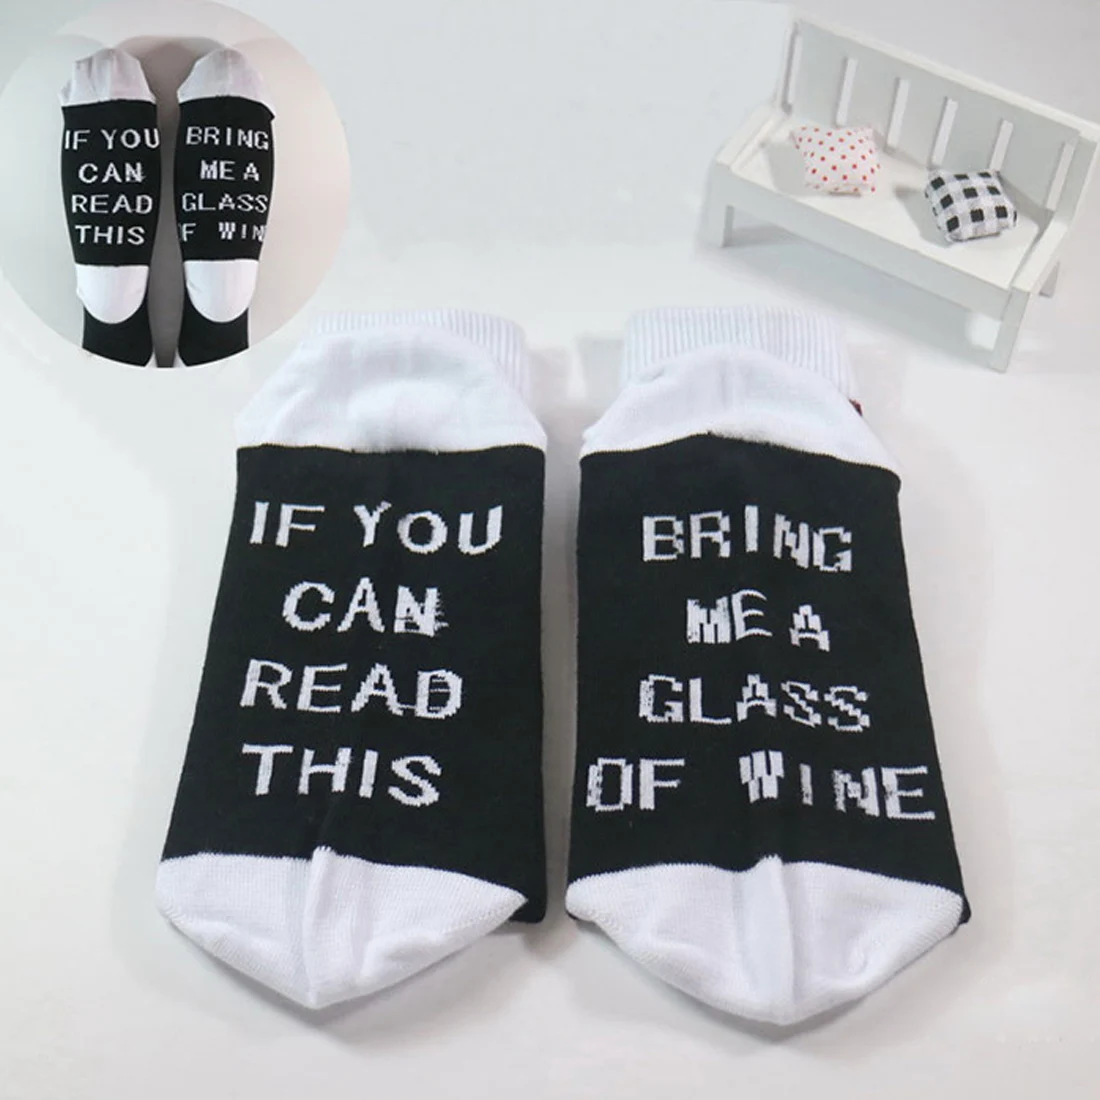 

Funny If You Can Read This Bring Me A Beer Pattern Novelty Art Christmas Gift Humour Words Socks Hipster Rock Punk Club Sox